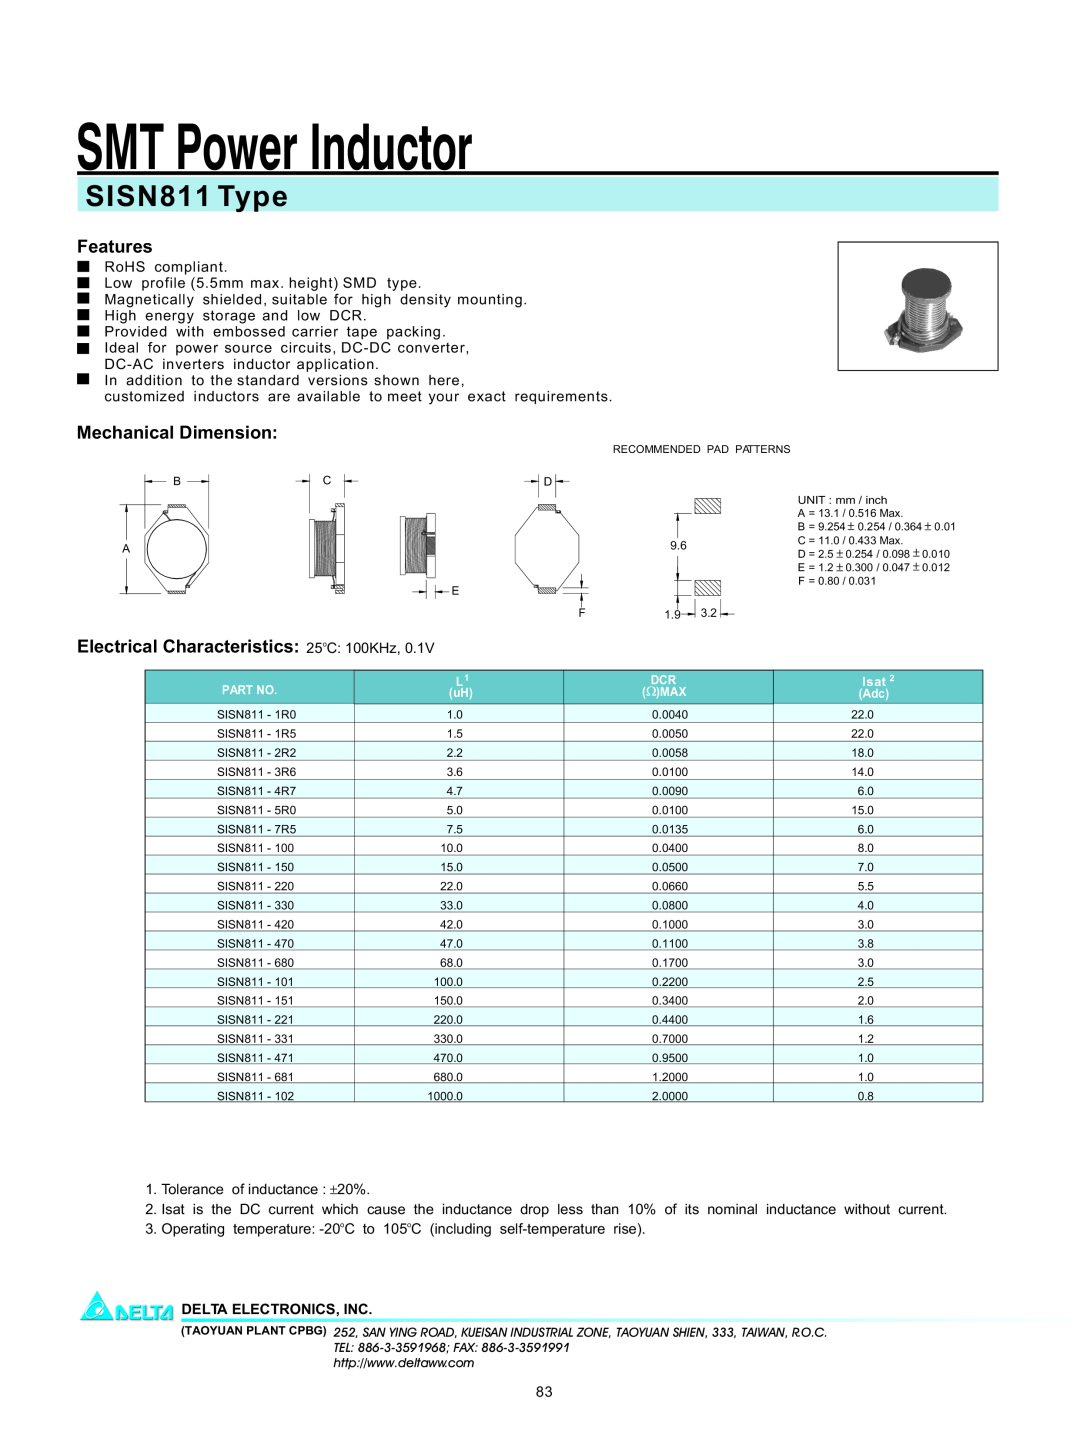 Delta Electronics manual SMT Power Inductor, SISN811 Type, Features, Mechanical Dimension, Delta Electronics, Inc 